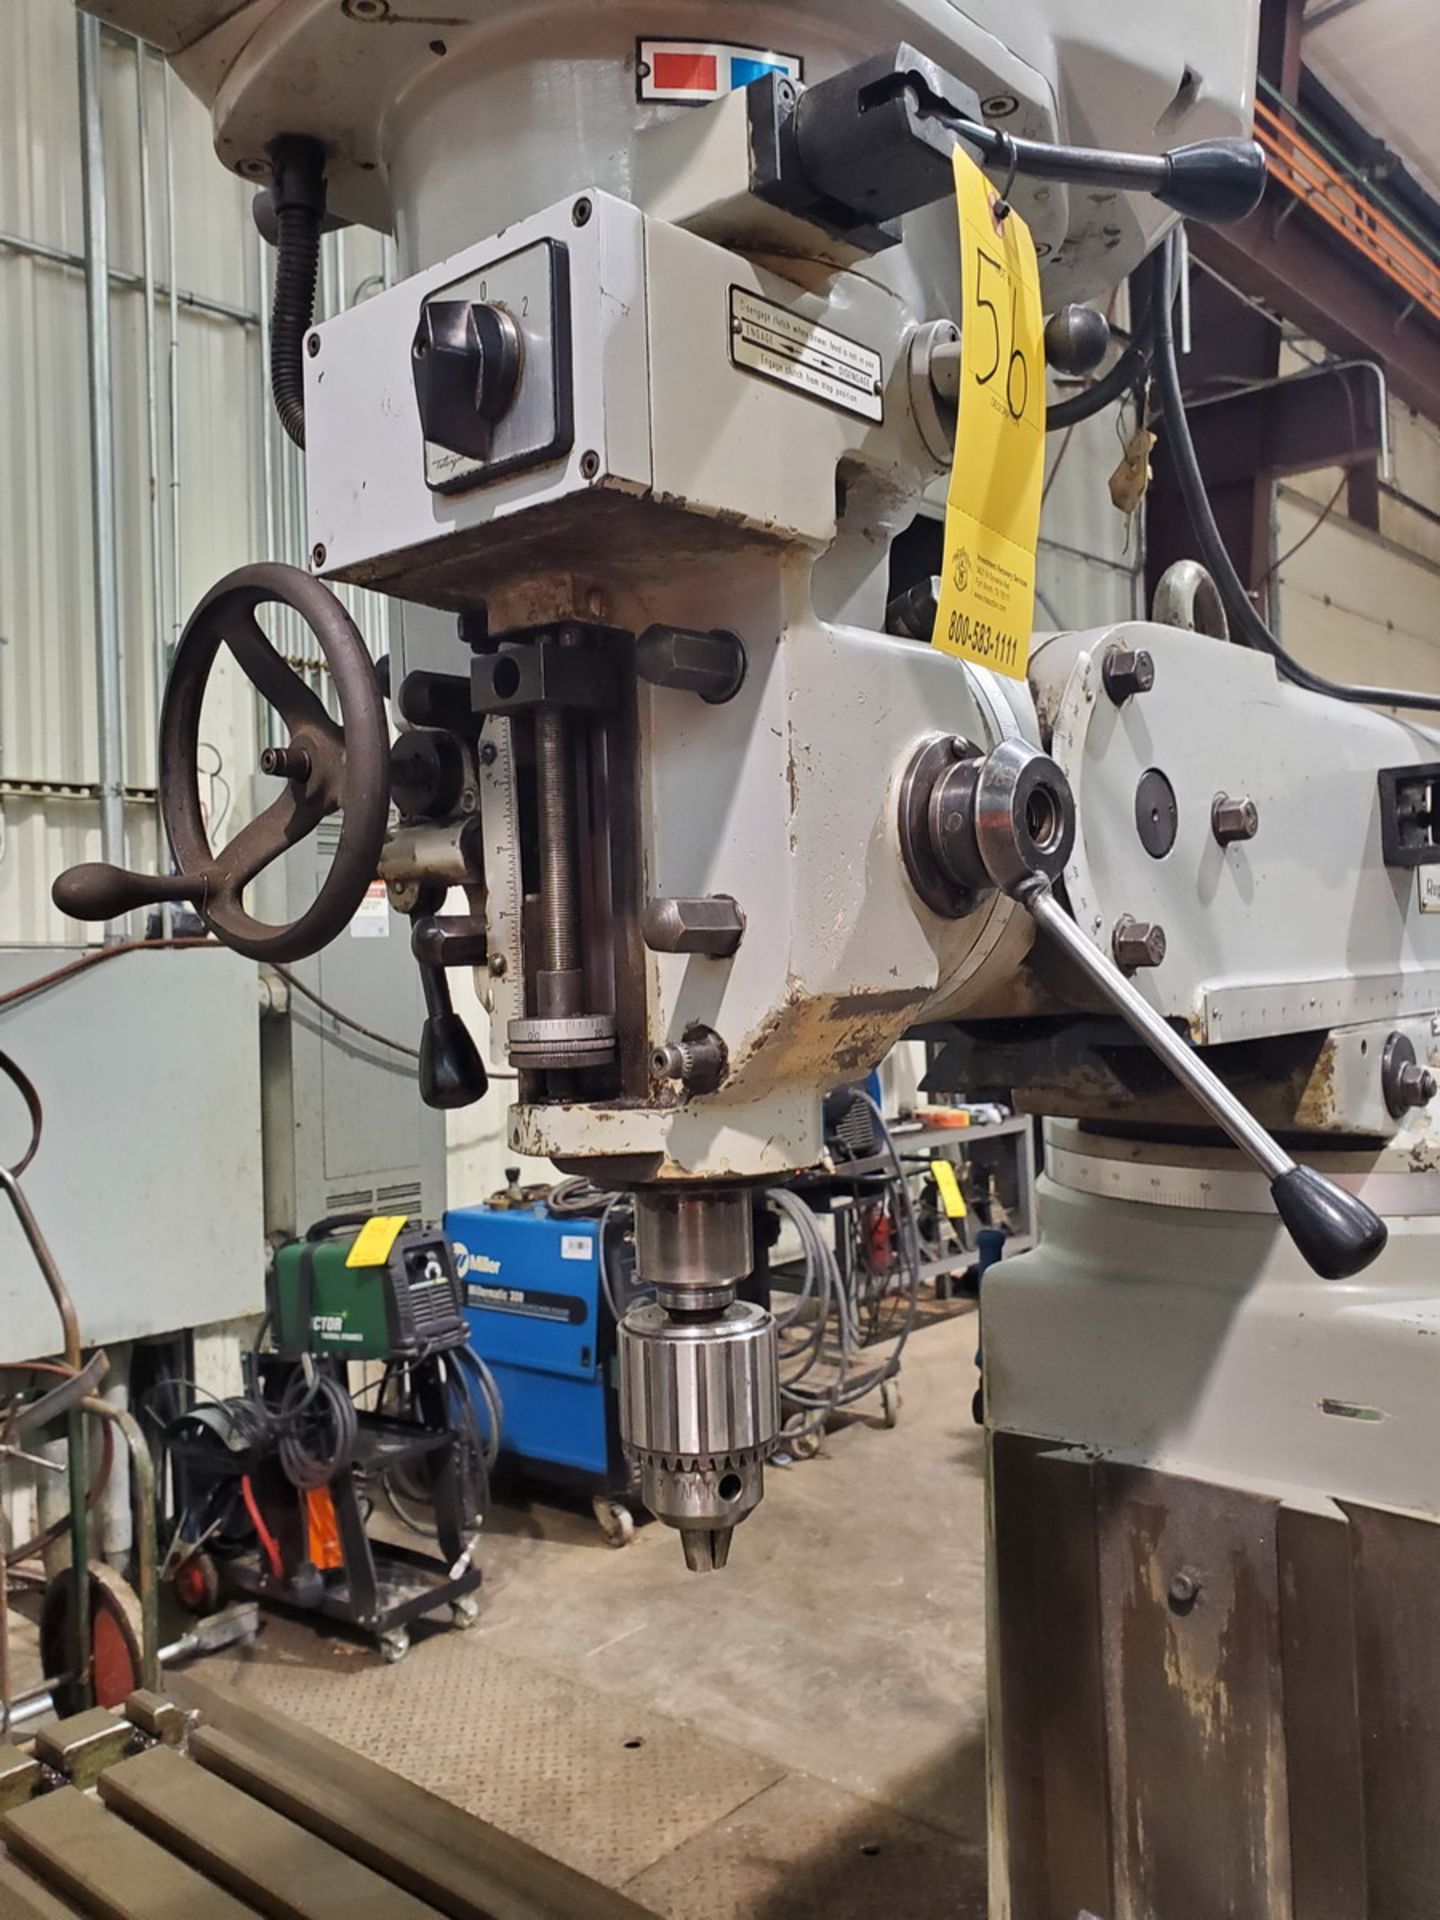 Lagun FTV 2 Turret Milling Machine W/ Acu-Rite Controller; 50" x 10" Slotted Table - Image 8 of 14